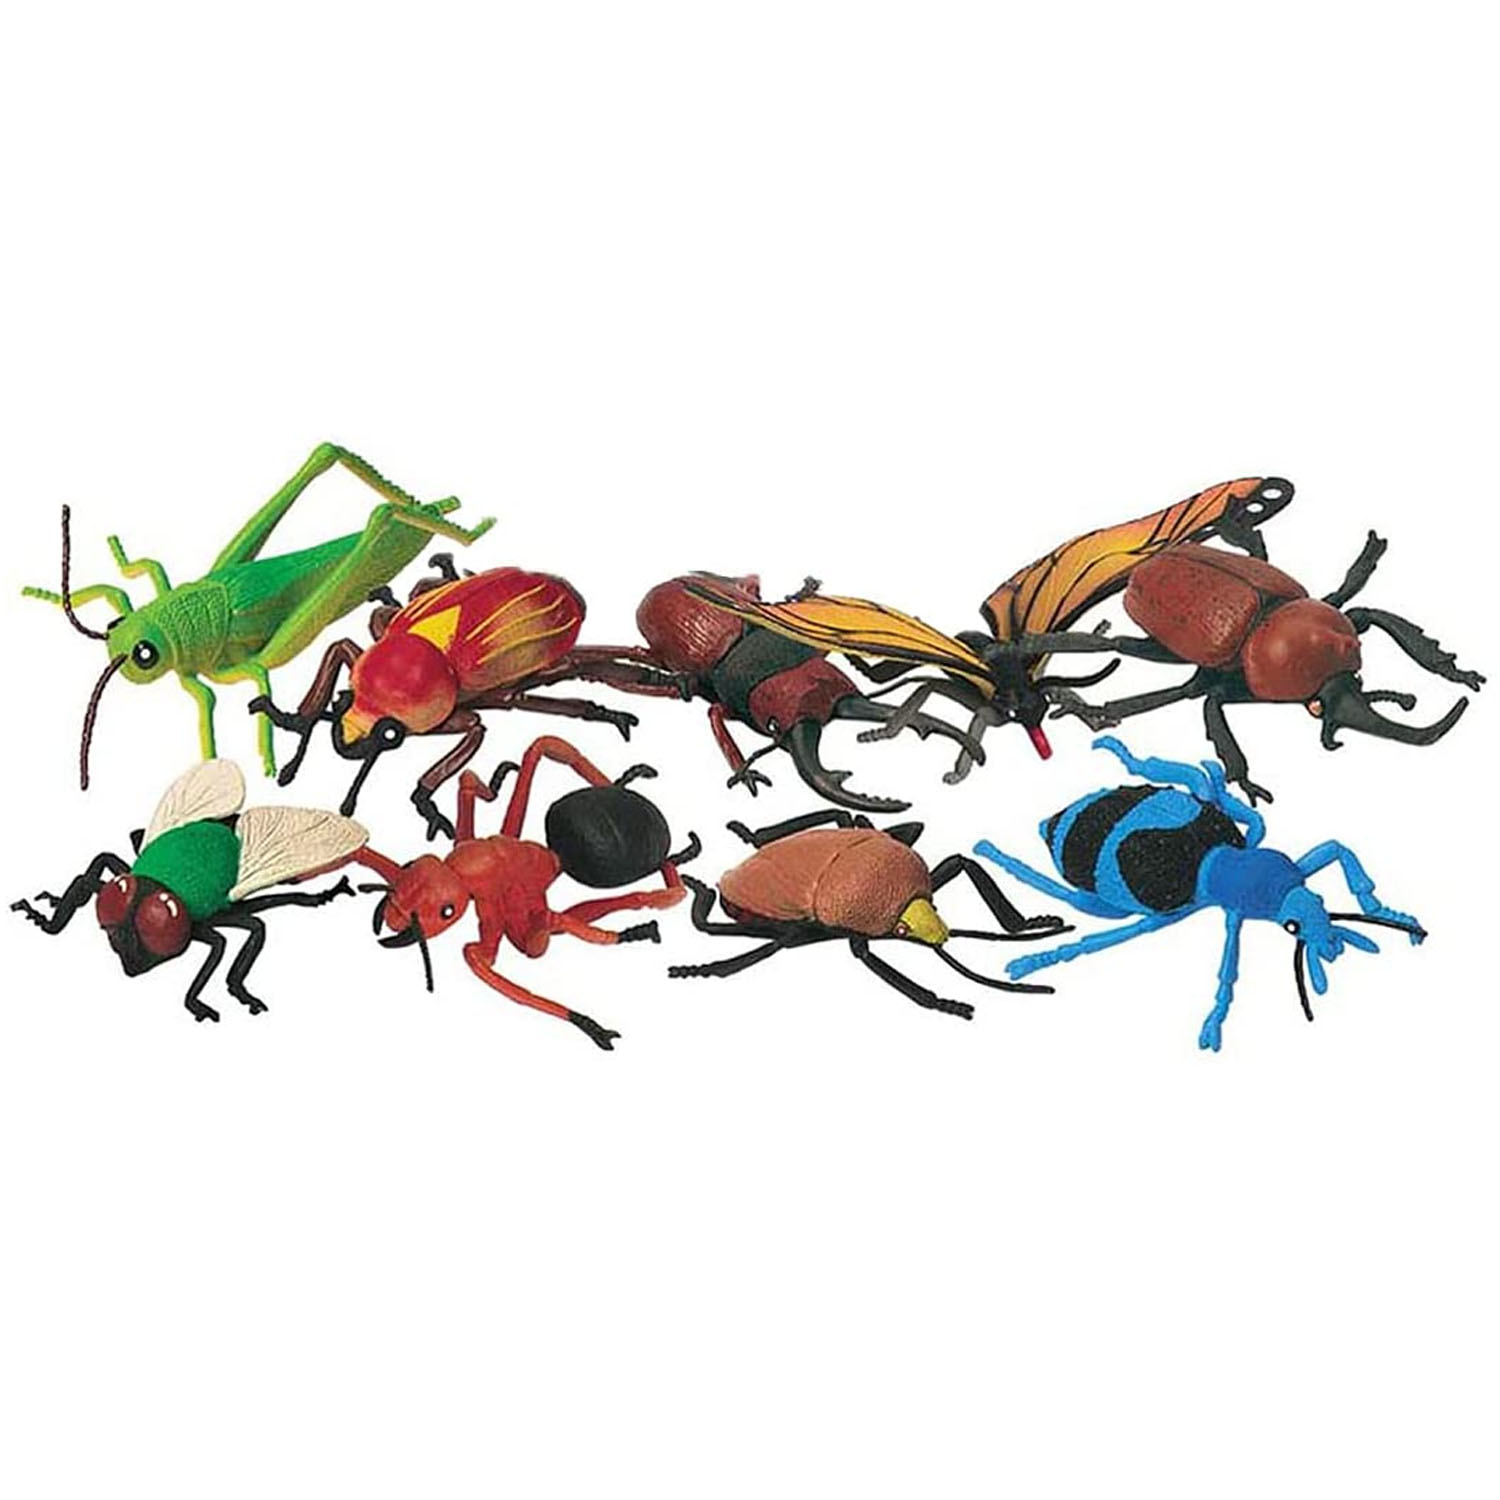 Insect and Arachnid Figurines